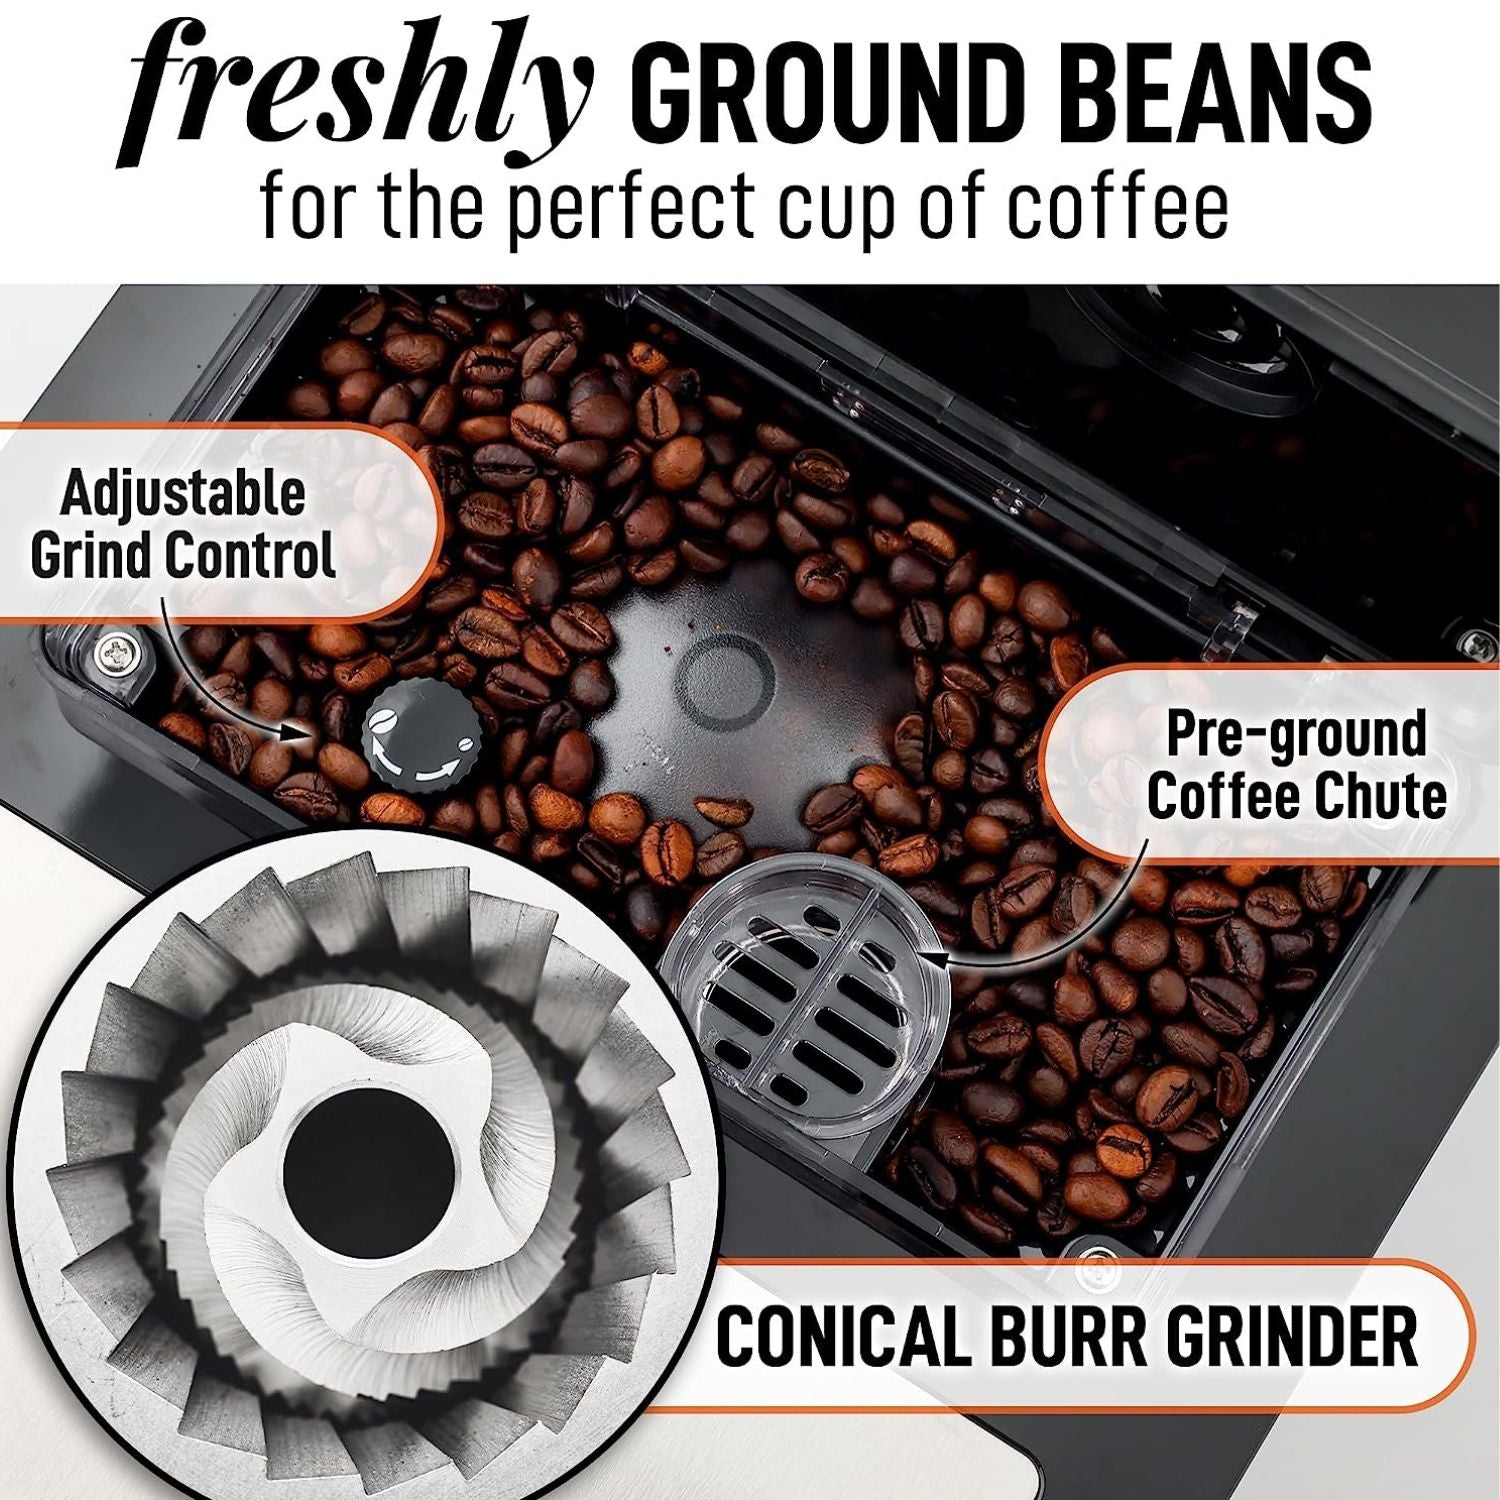 with built in Conical Burr Grinder